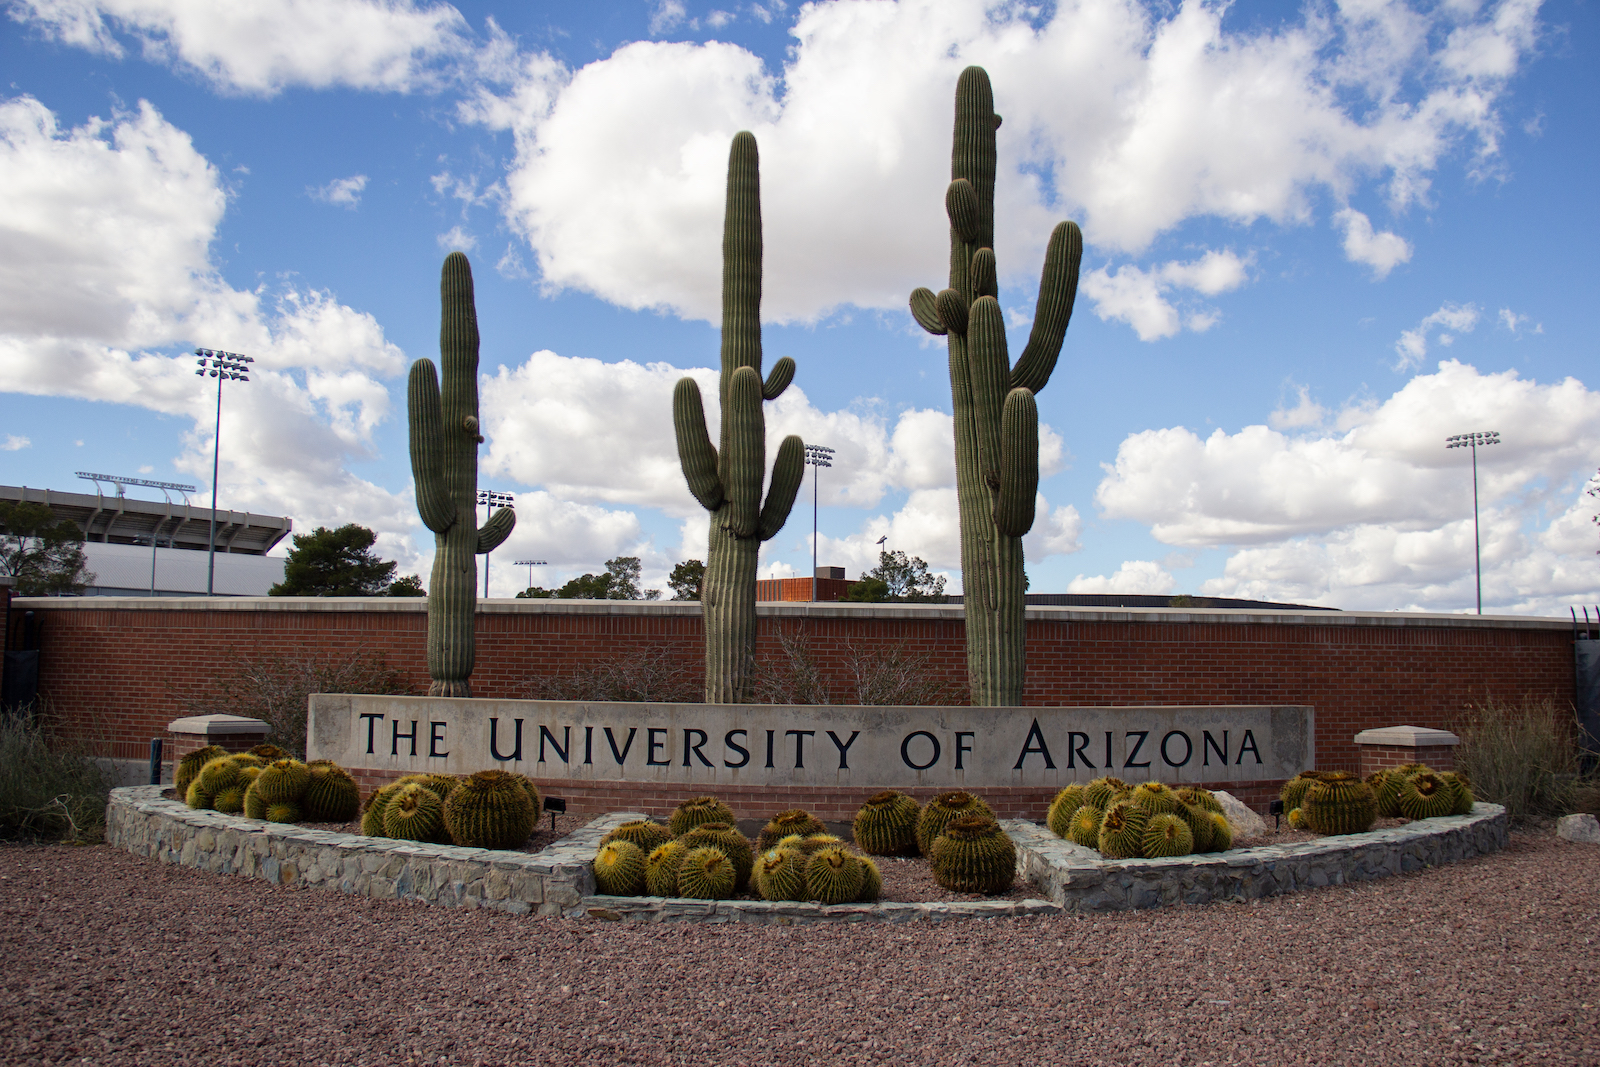 Three cacti grow behind a sign for the University of Arizona